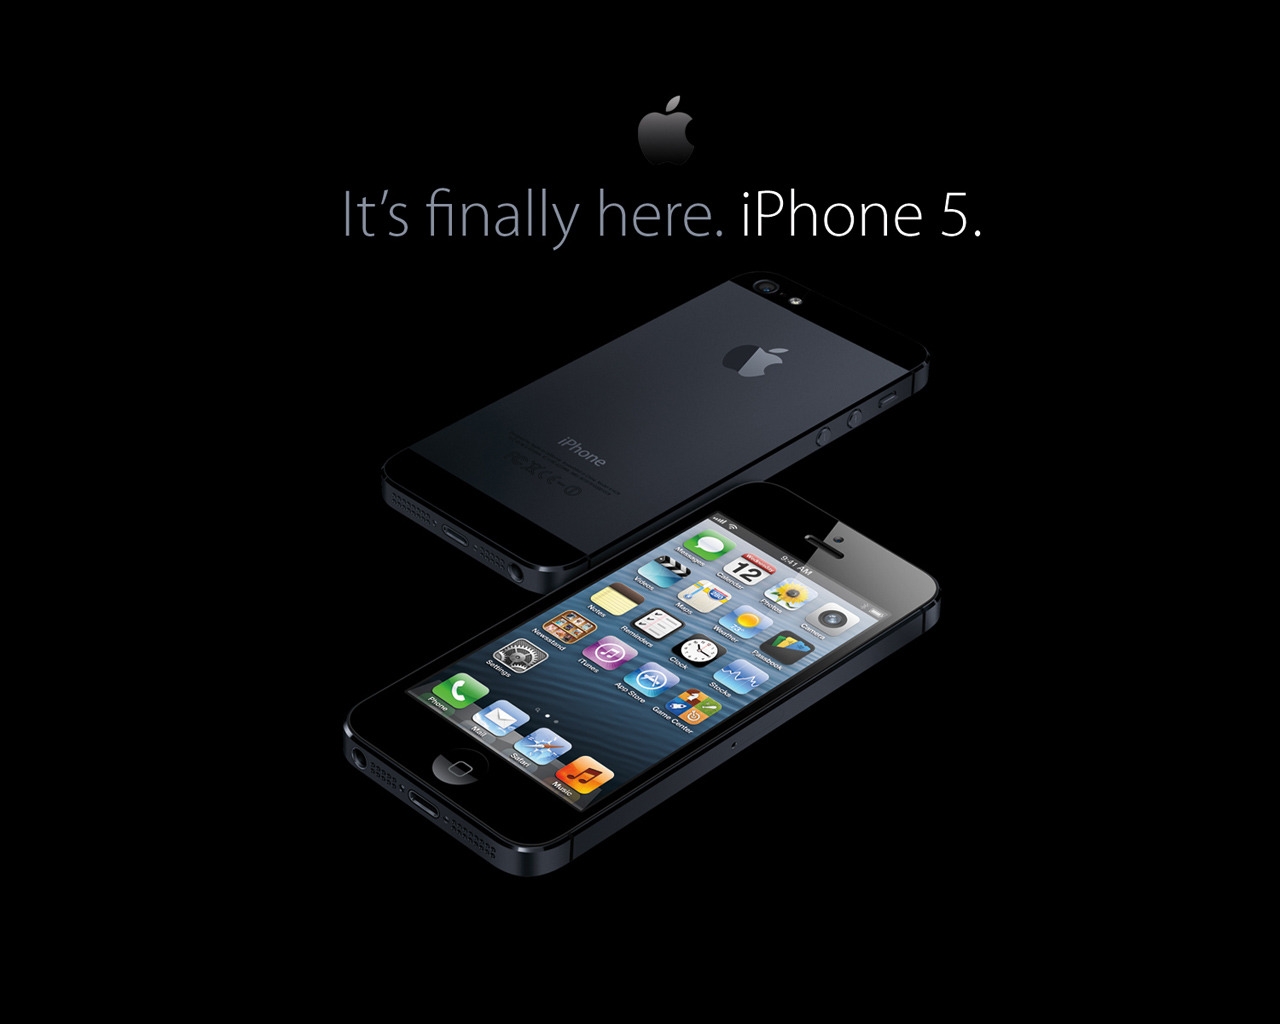 New iPhone 5 Handset Black for 1280 x 1024 resolution